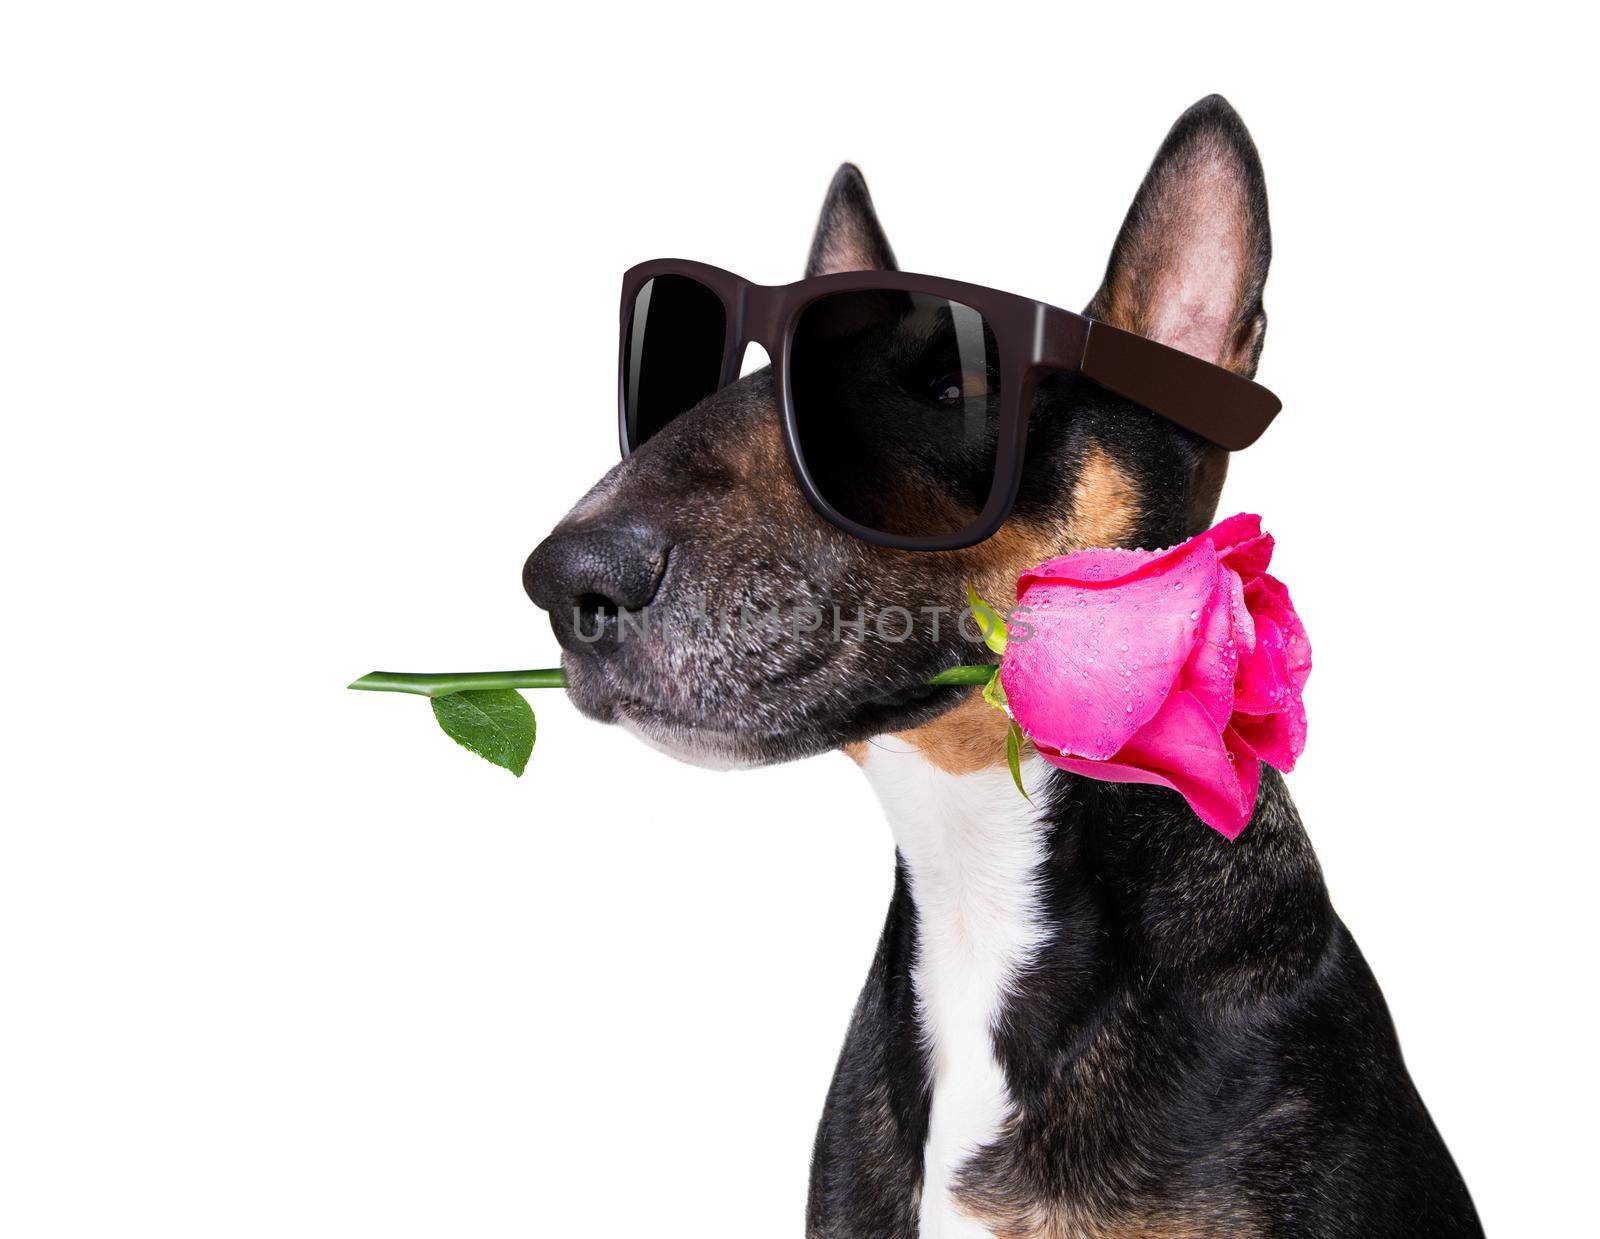 bull terrier dog on valentines love or mothers and fathers day with rose and petals